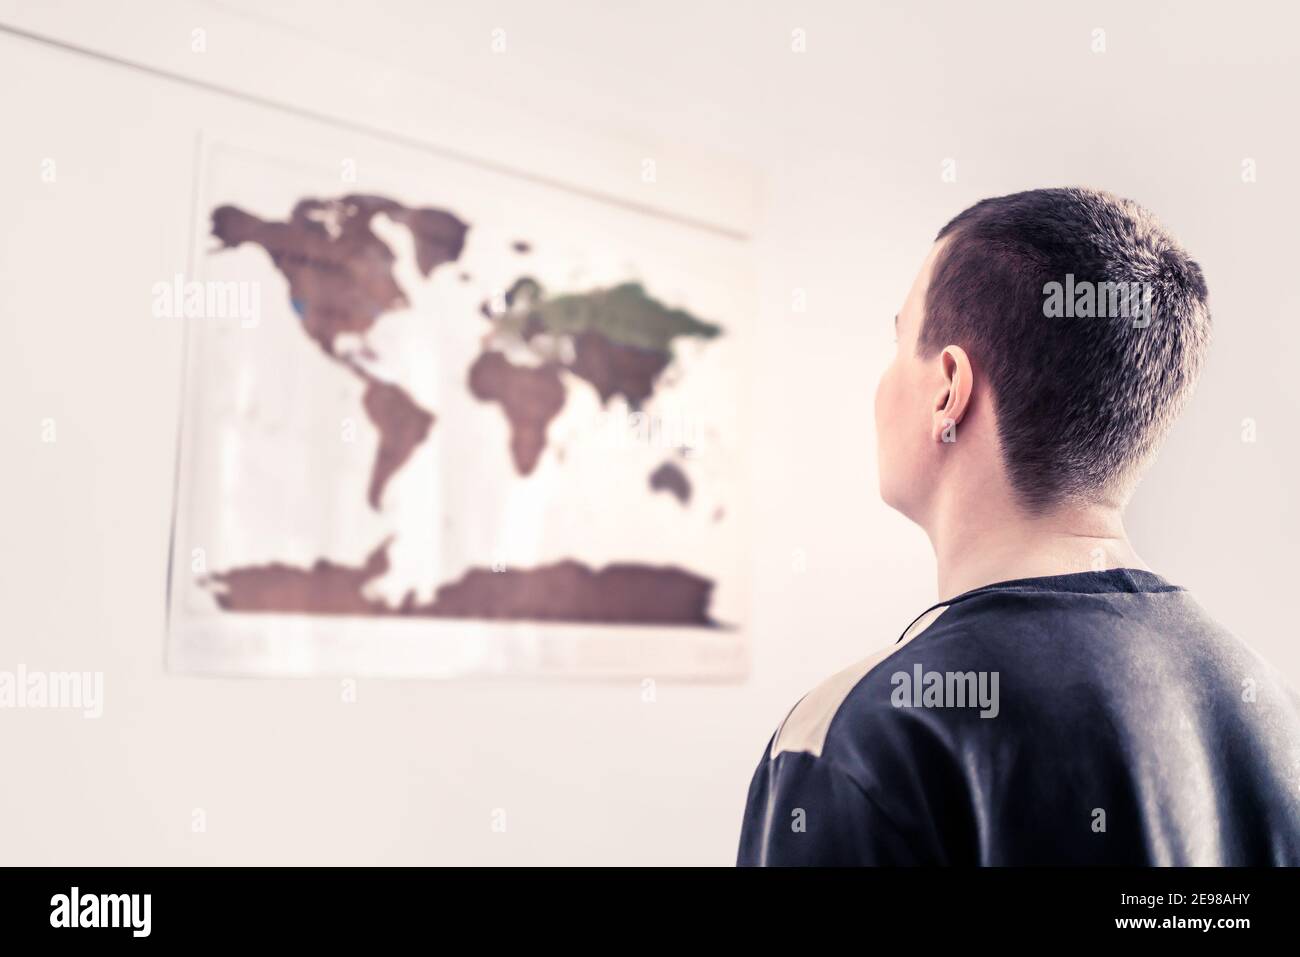 Man looking at a world map on the wall. Thinking about the changing environment, uncertain future or worldwide problems. Global equality, human rights. Stock Photo